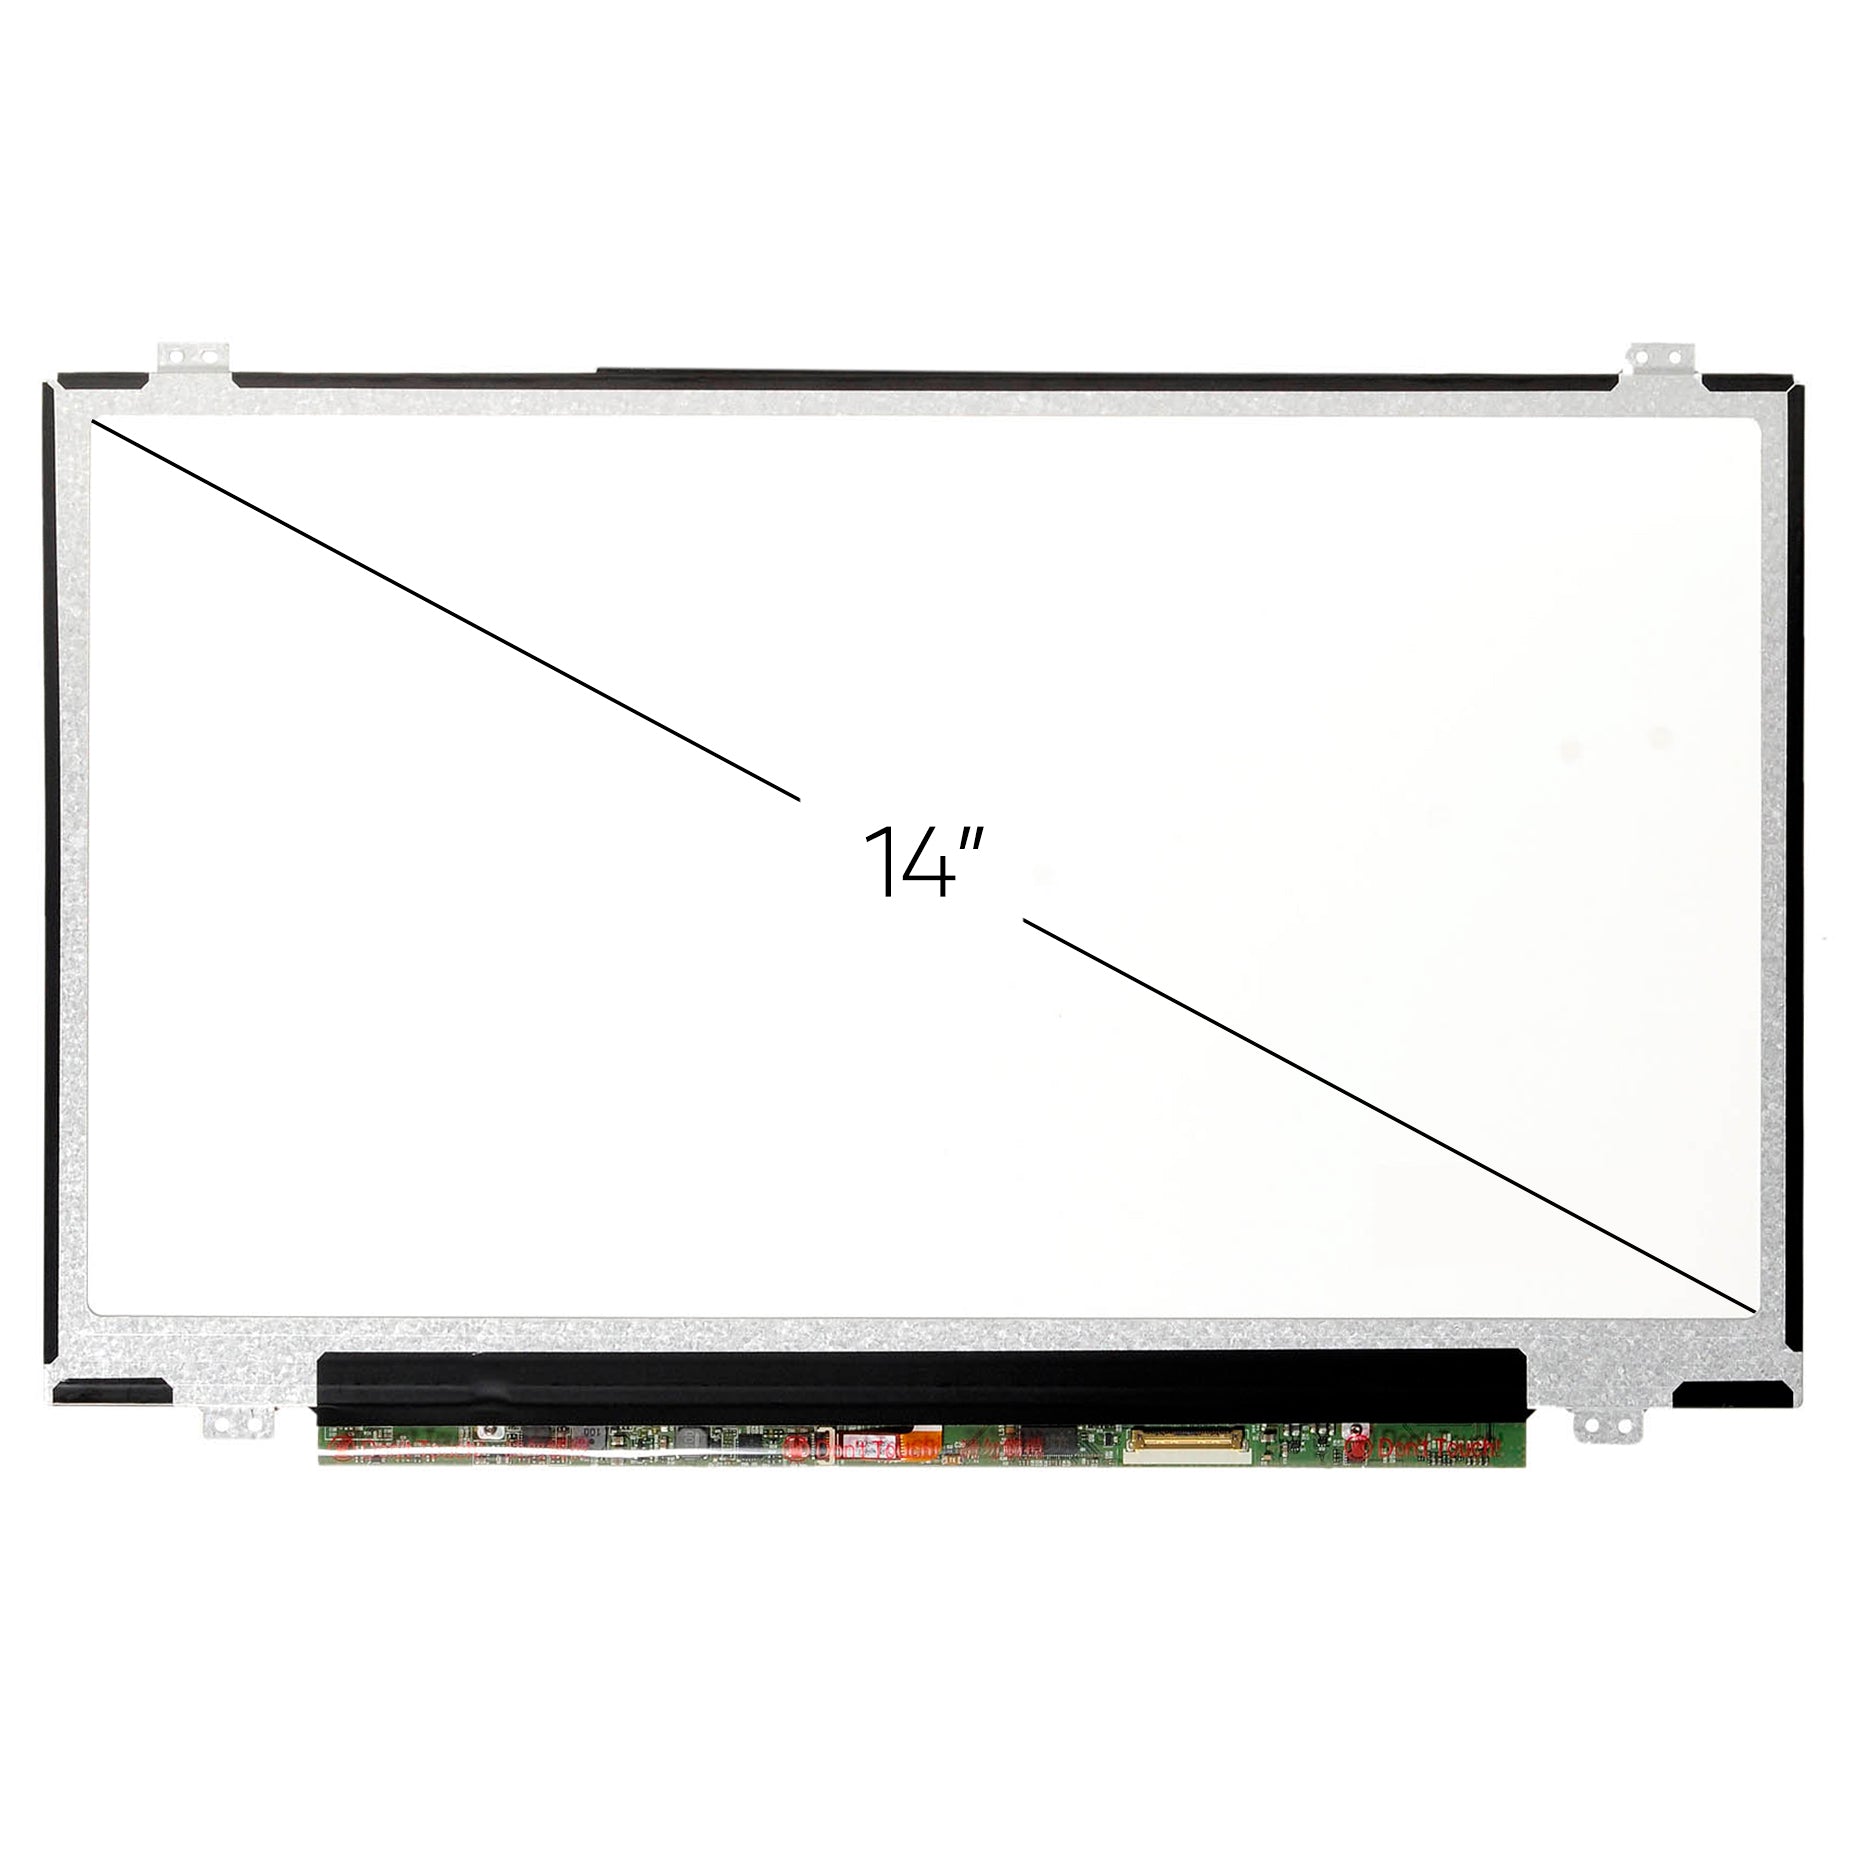 Screen Replacement for Lenovo Ideapad 120S-14IAP FHD 1920x1080 IPS Matte LCD LED Display